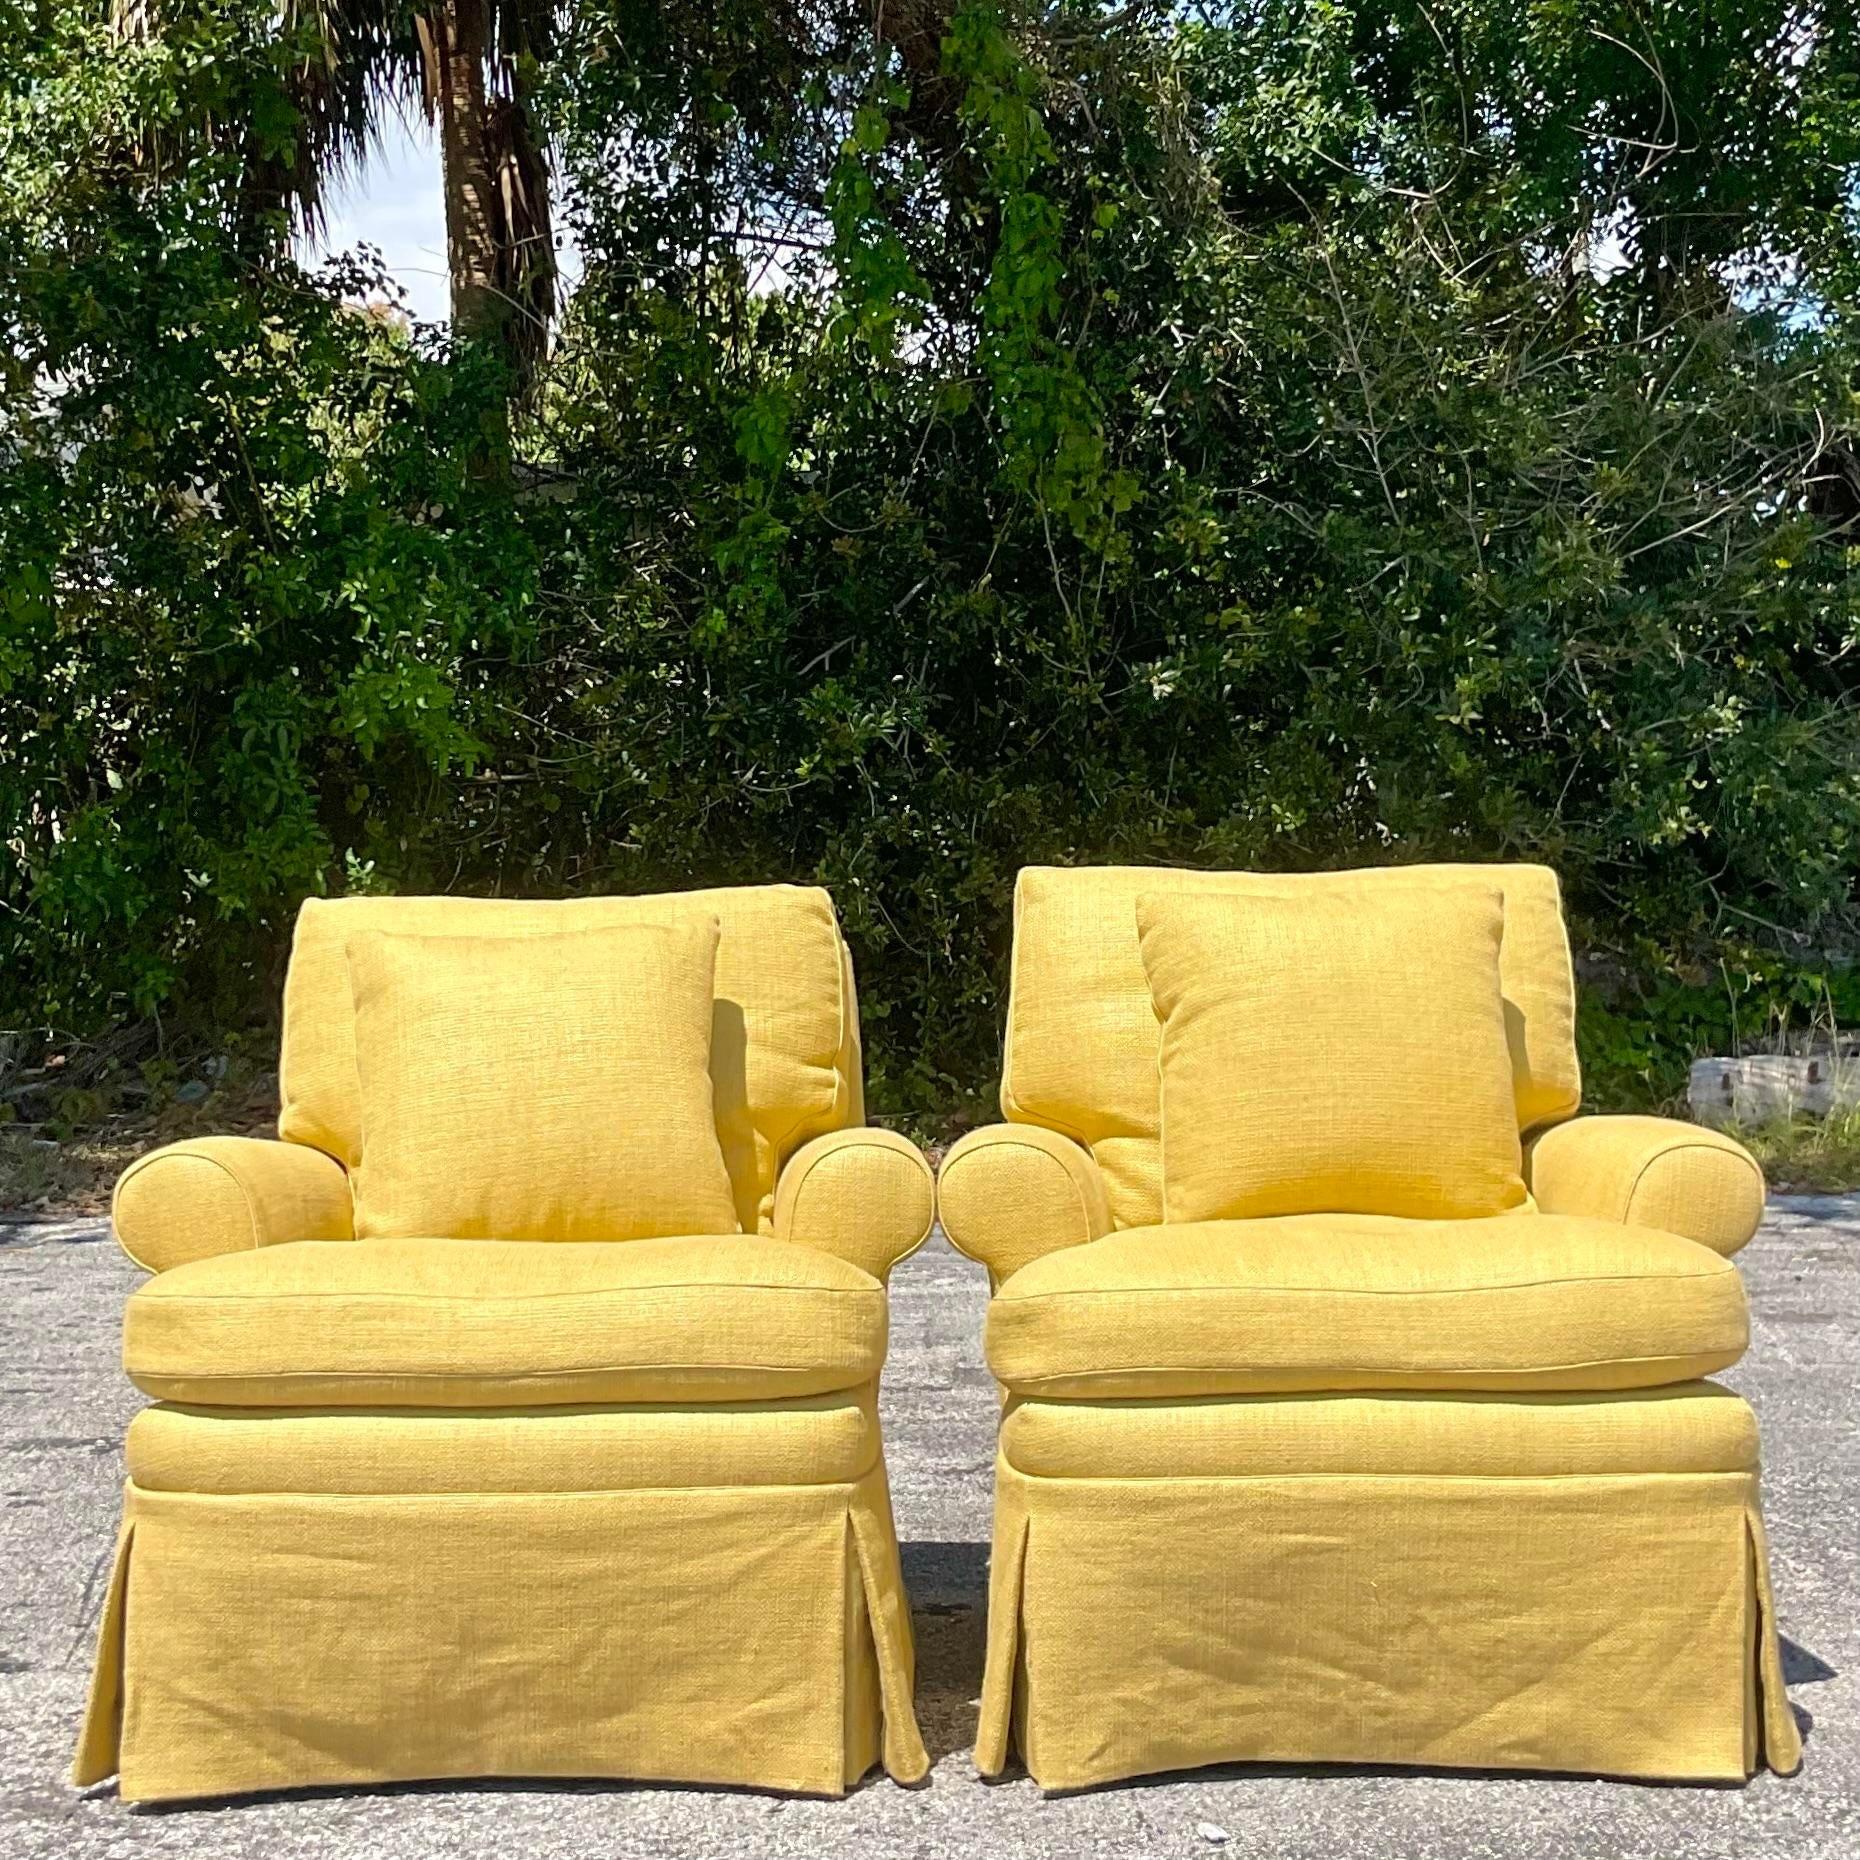 Upholstery Vintage Regency Chartreuse Down Lounge Chairs - a Pair For Sale